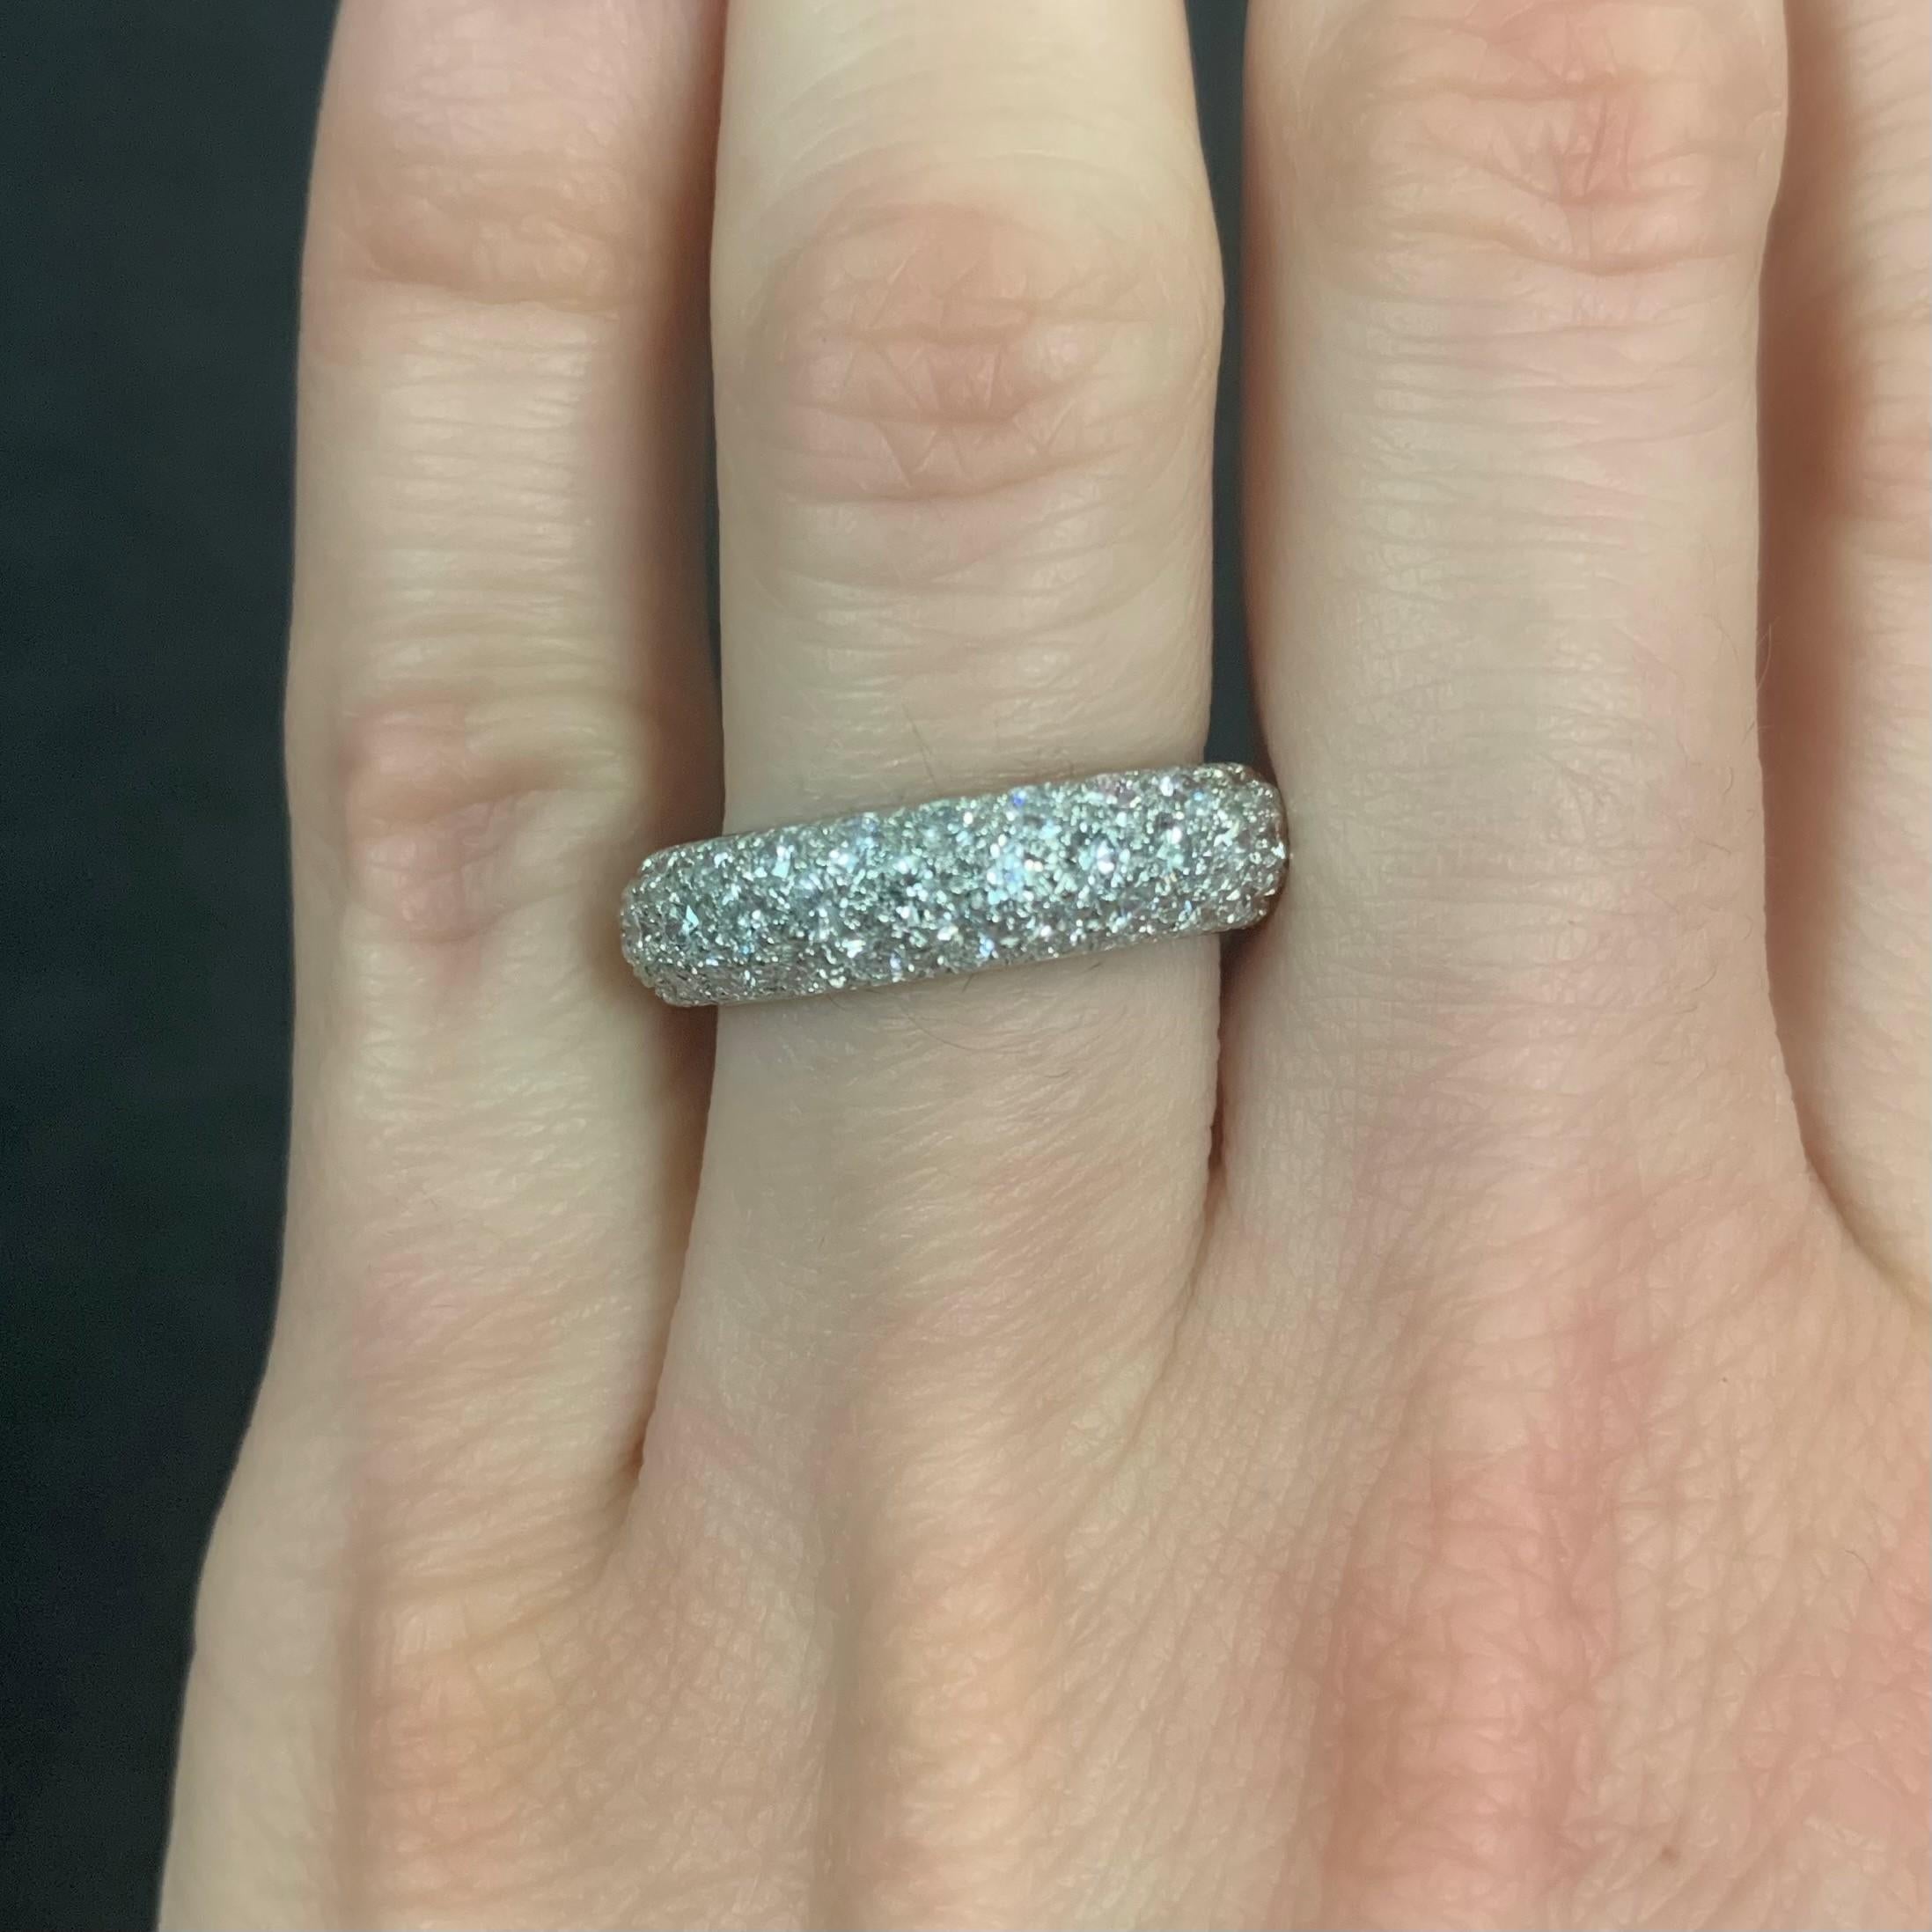 Oscar Heyman platinum rounded diamond band ring contains 72 Round Diamonds (F-G/ VS+ quality) weighing 2.41cts that are bead set. The diamonds extend around the whole ring. The ring is 5mm wide, sits 2.5mm off the finger, and is stamped with the